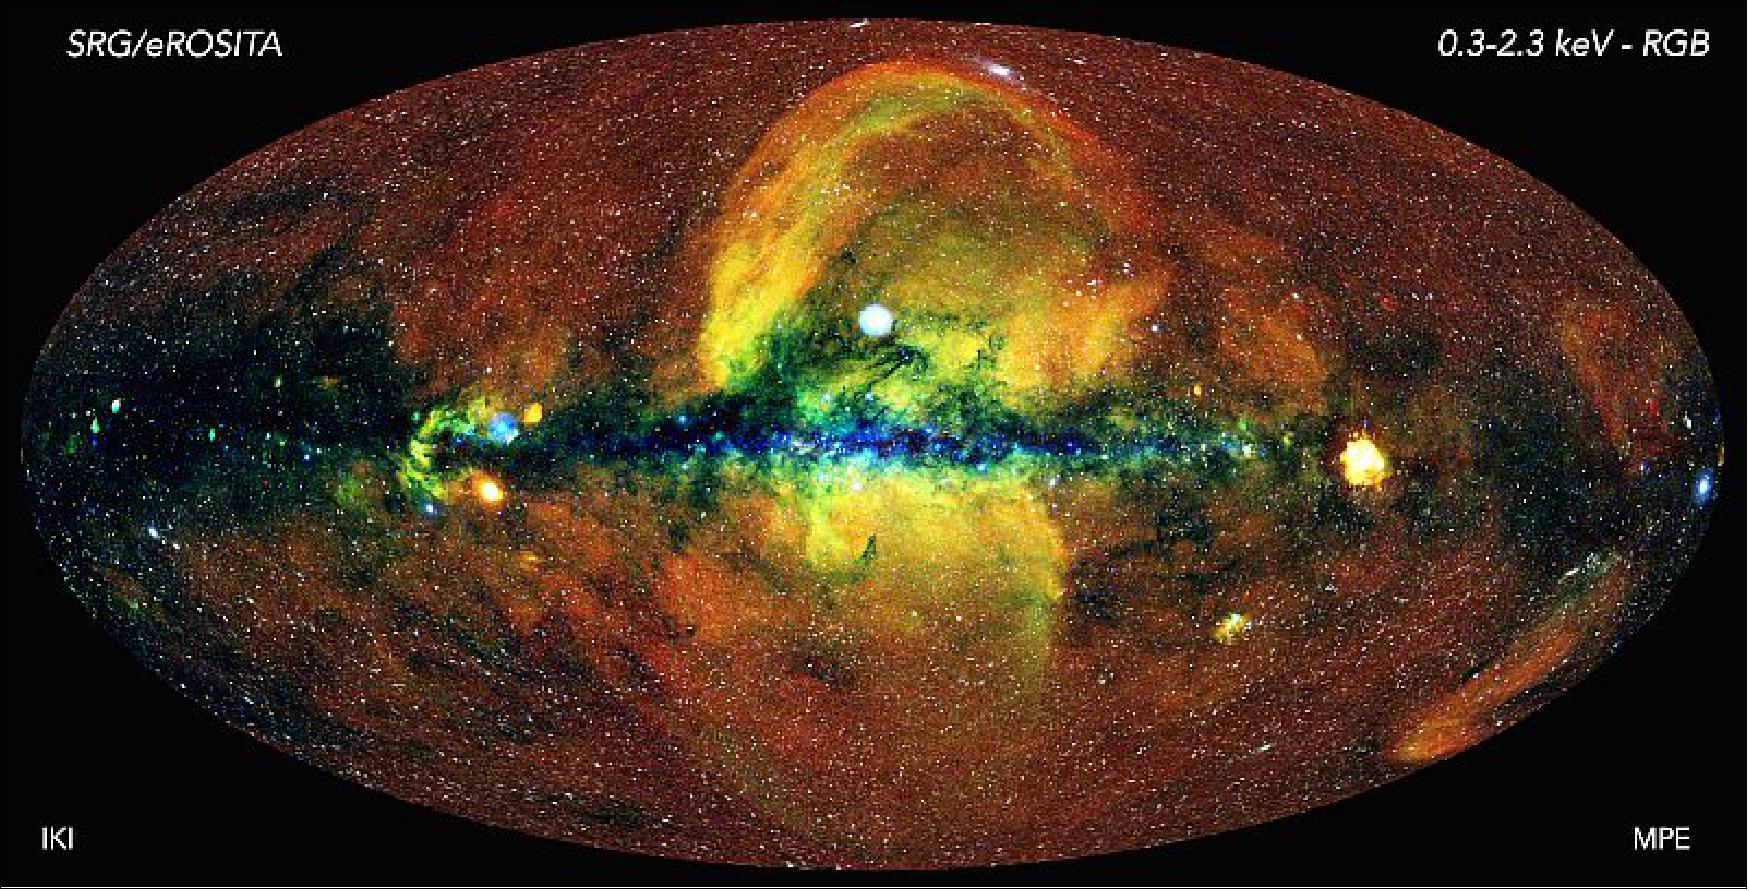 Figure 16: The energetic universe as seen with the eROSITA X-ray telescope [image credit: Jeremy Sanders, Hermann Brunner and the eSASS team (MPE); Eugene Churazov, Marat Gilfanov (on behalf of IKI)]